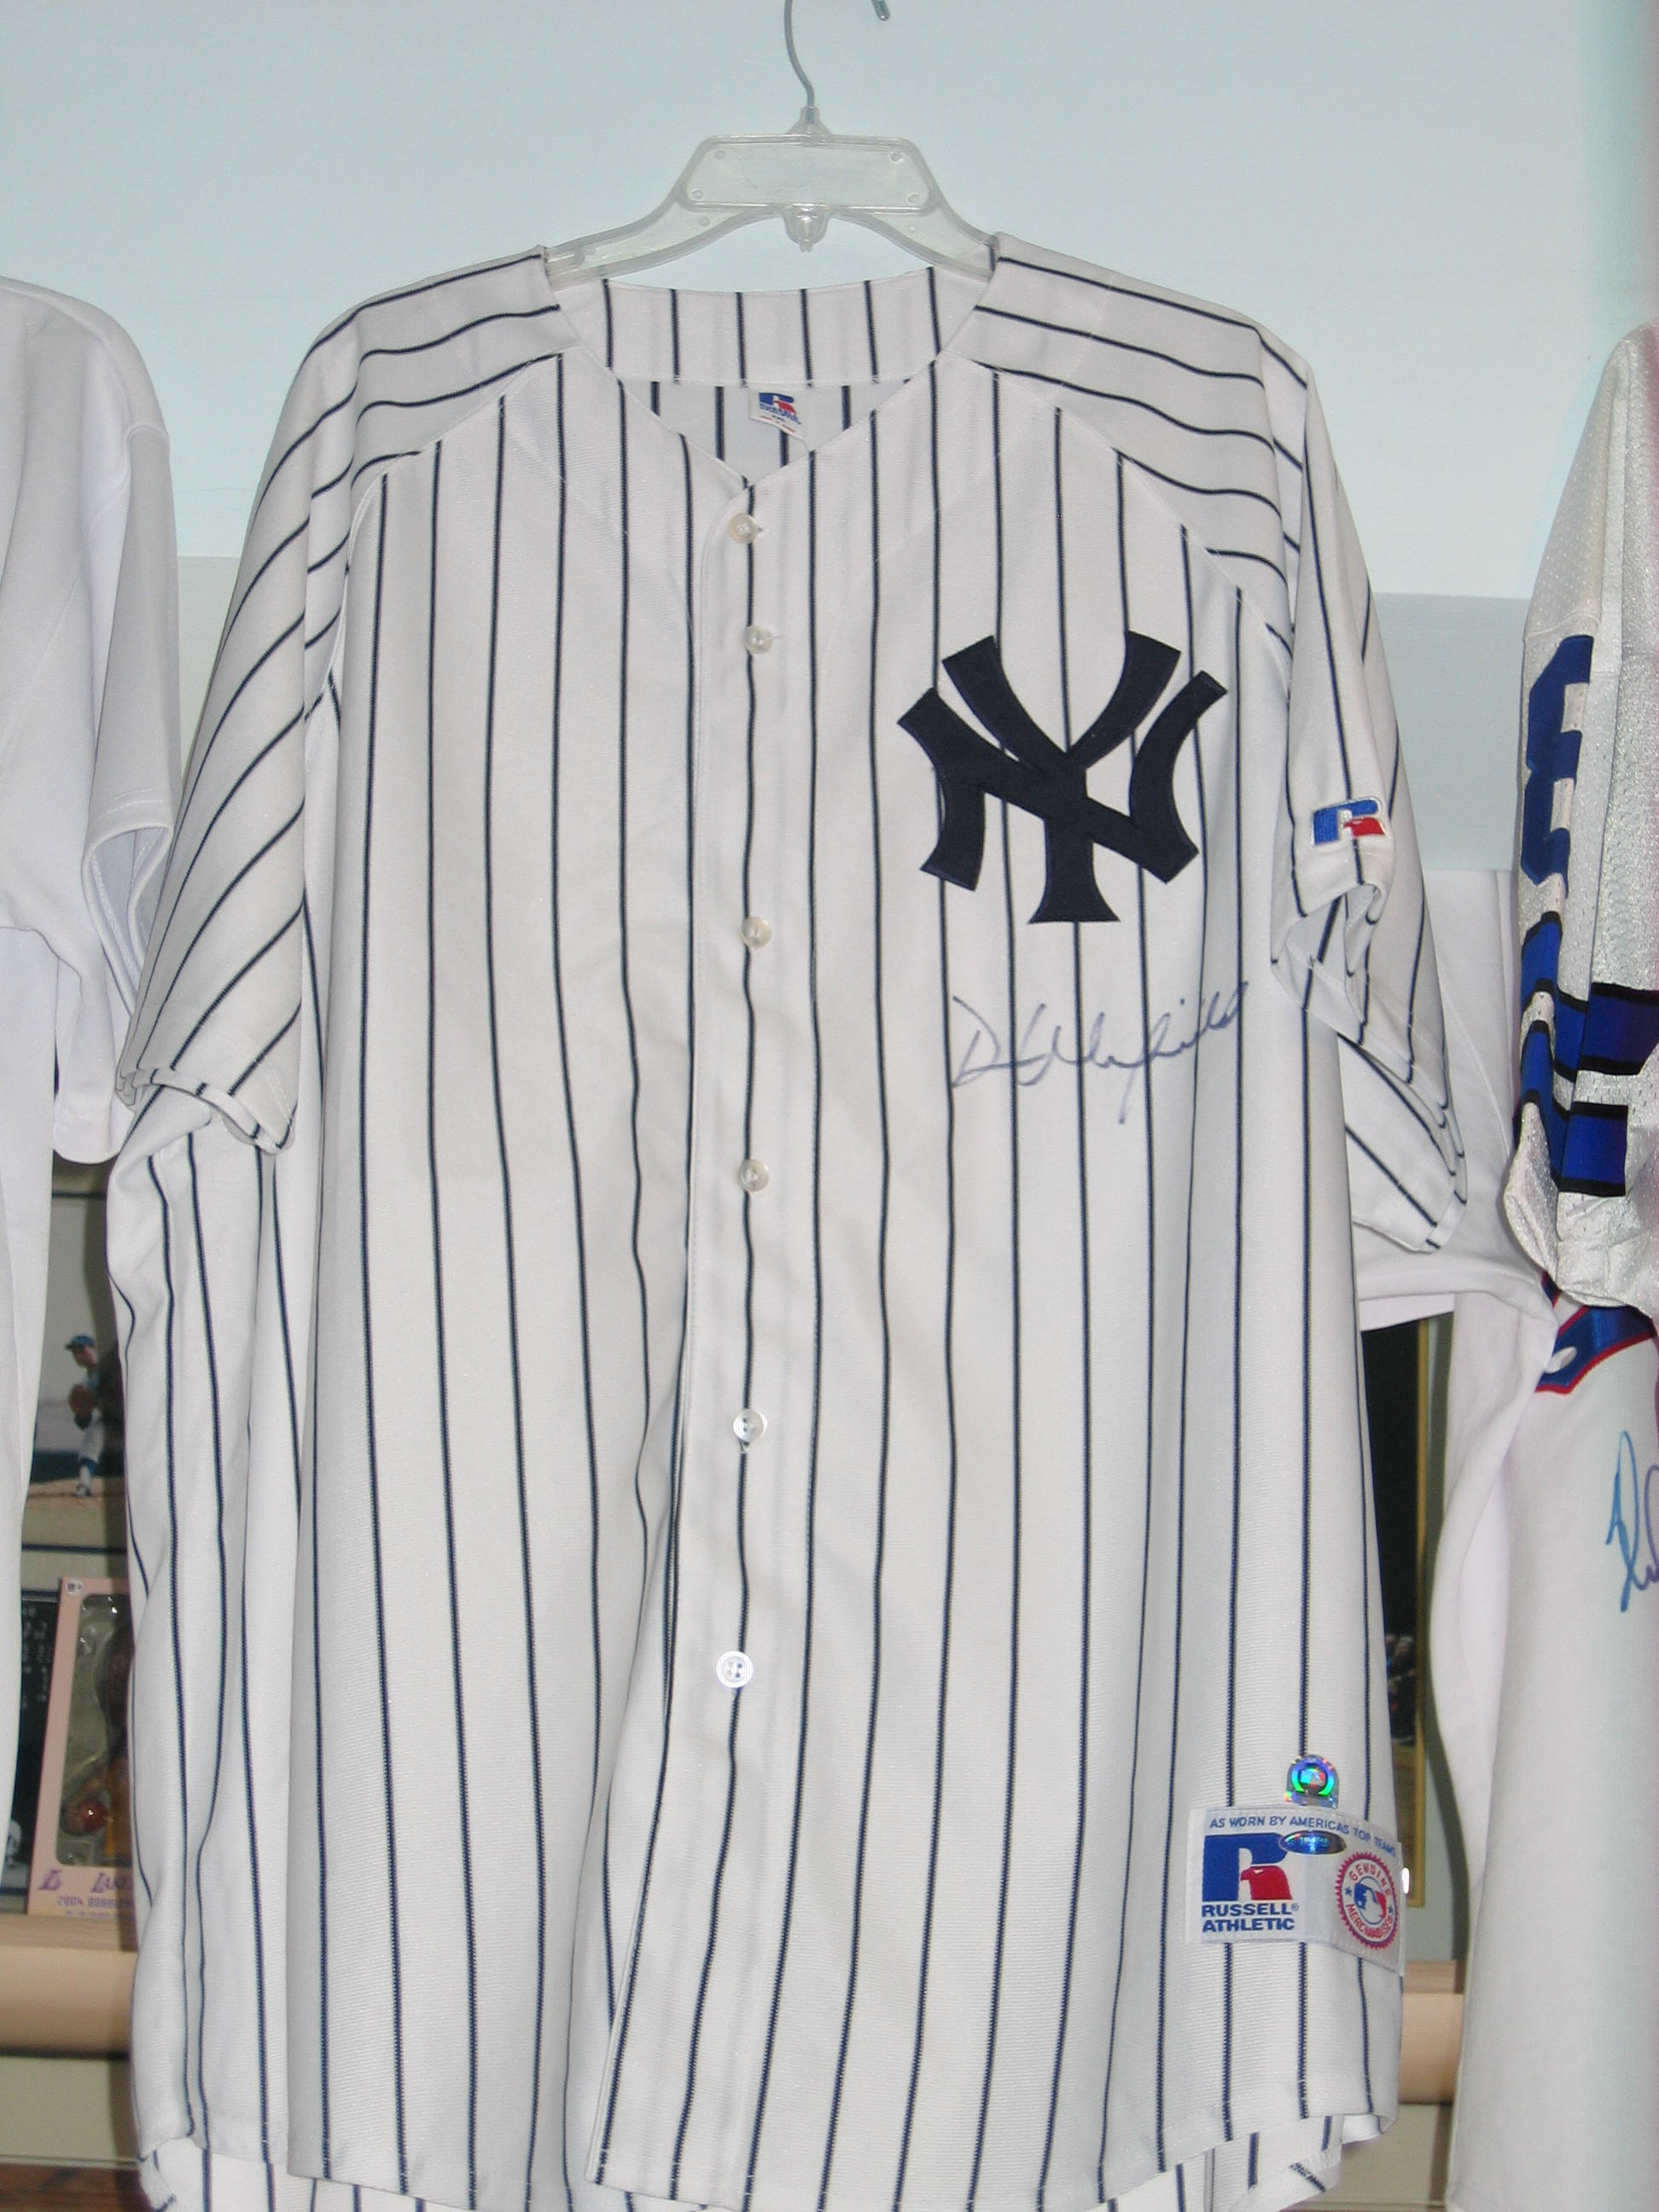 Dave Winfield Autographed Jersey (New York Yankees)